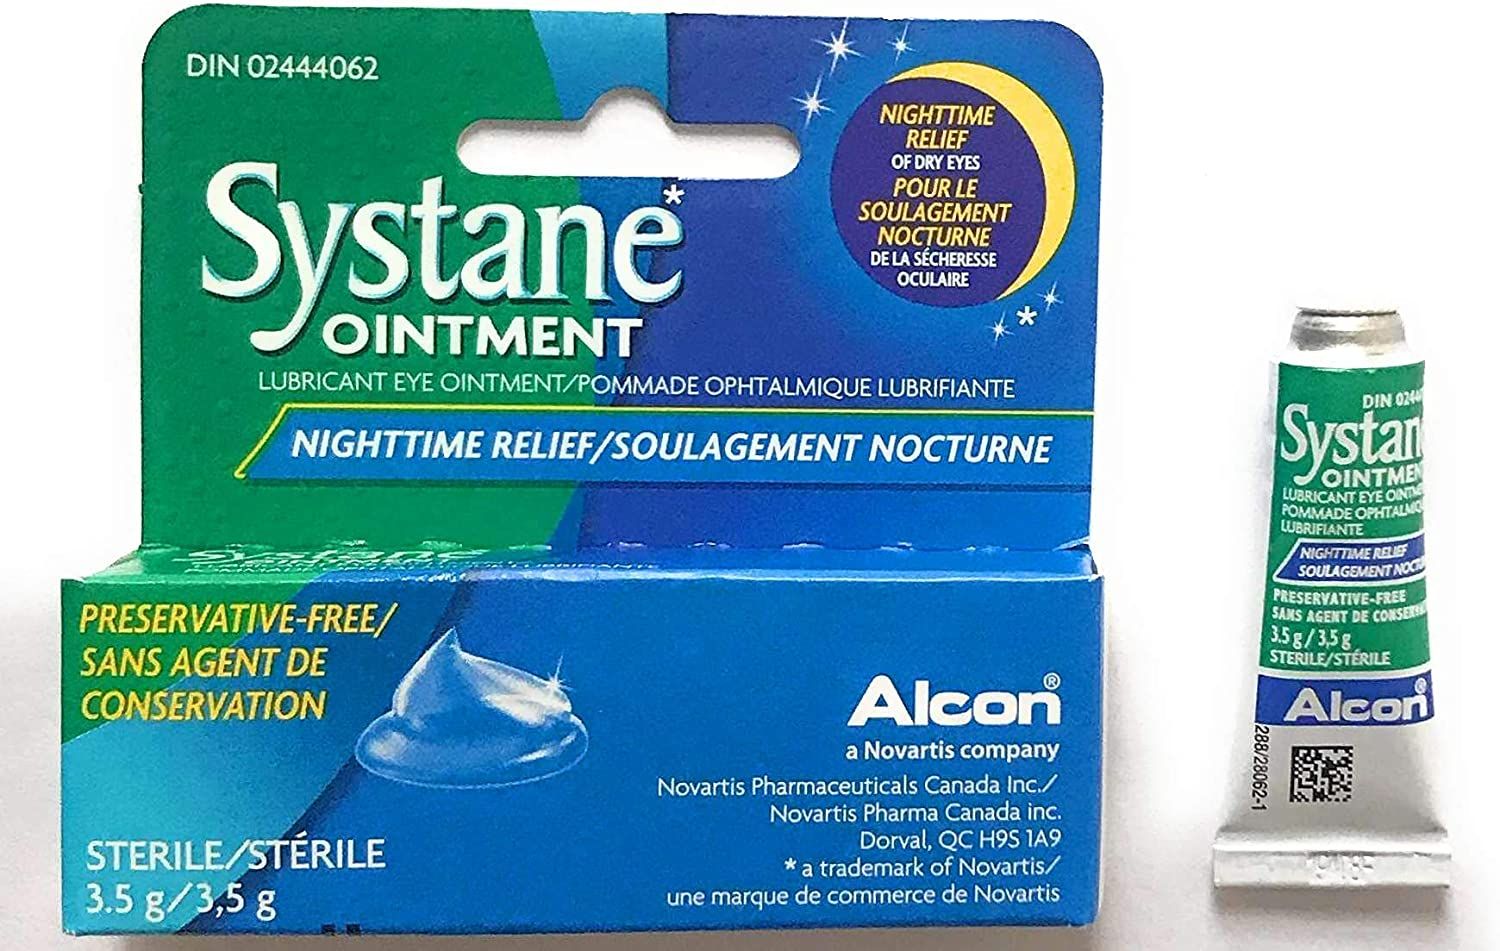 DISCSystane Night Time Lubricant Eye Ointment - 0.13 oz